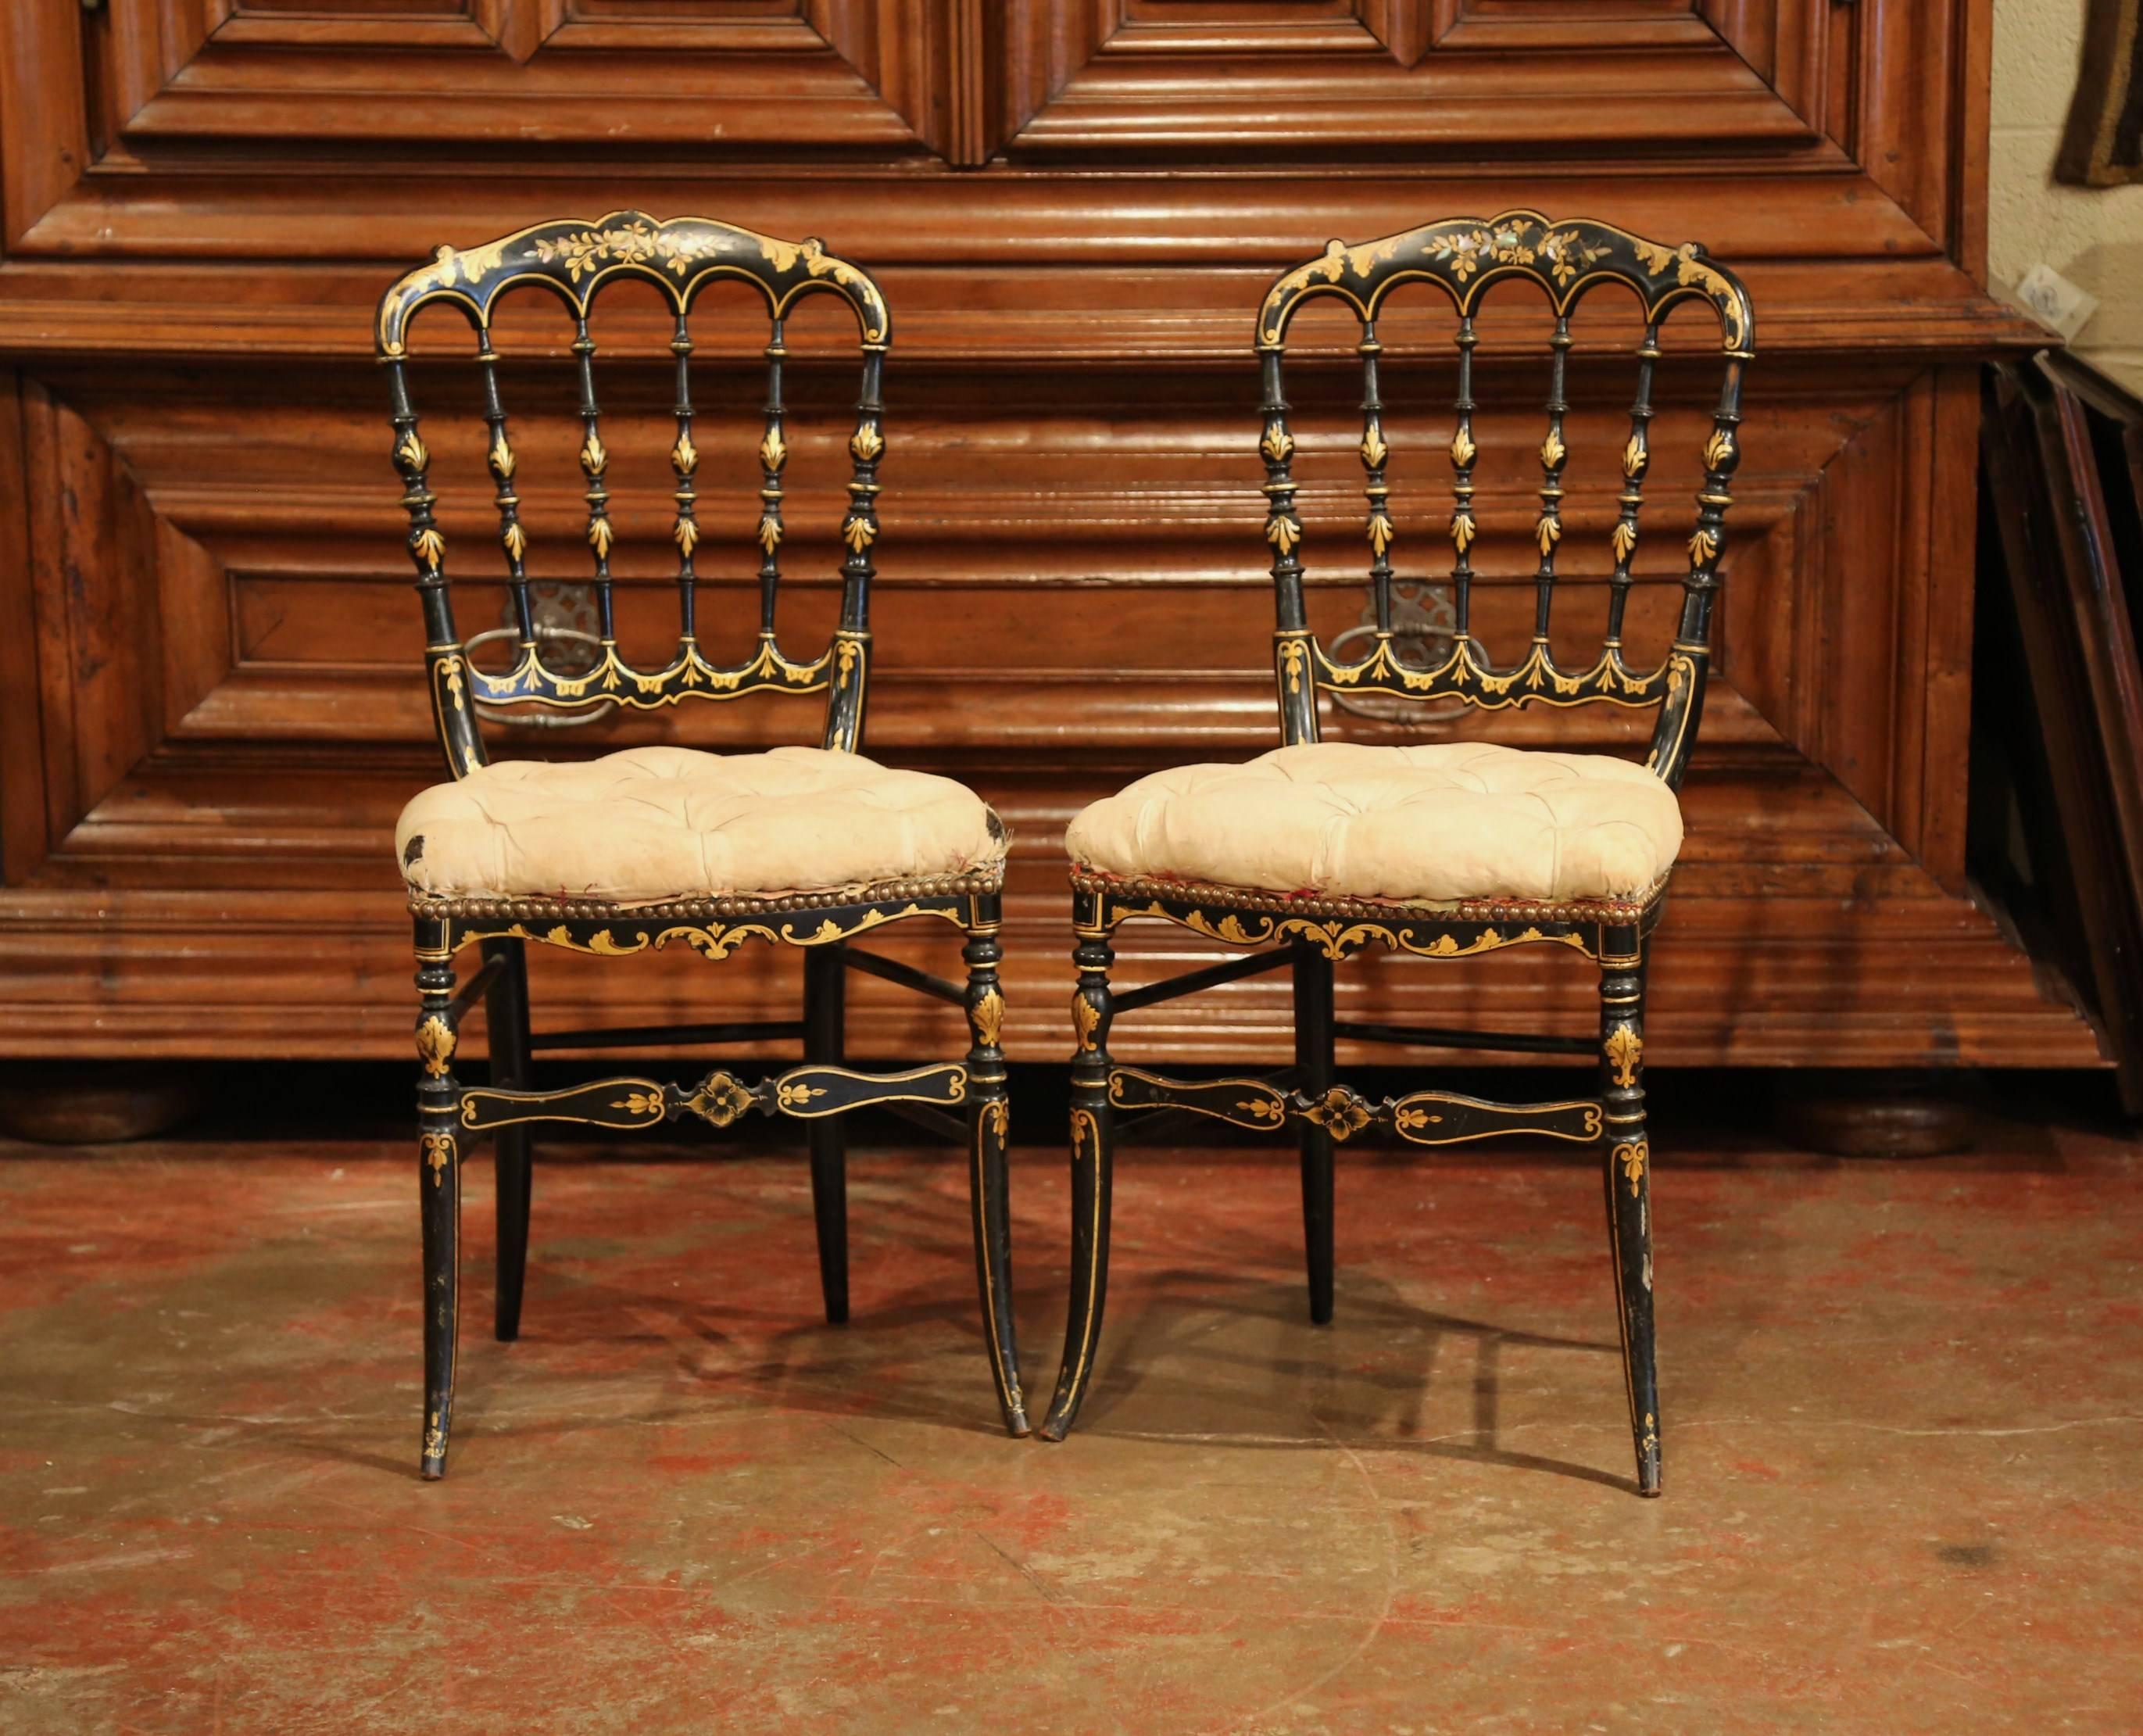 Pair of 19th Century French Napoleon III Black Lacquered Chairs with Gilt Decor 1